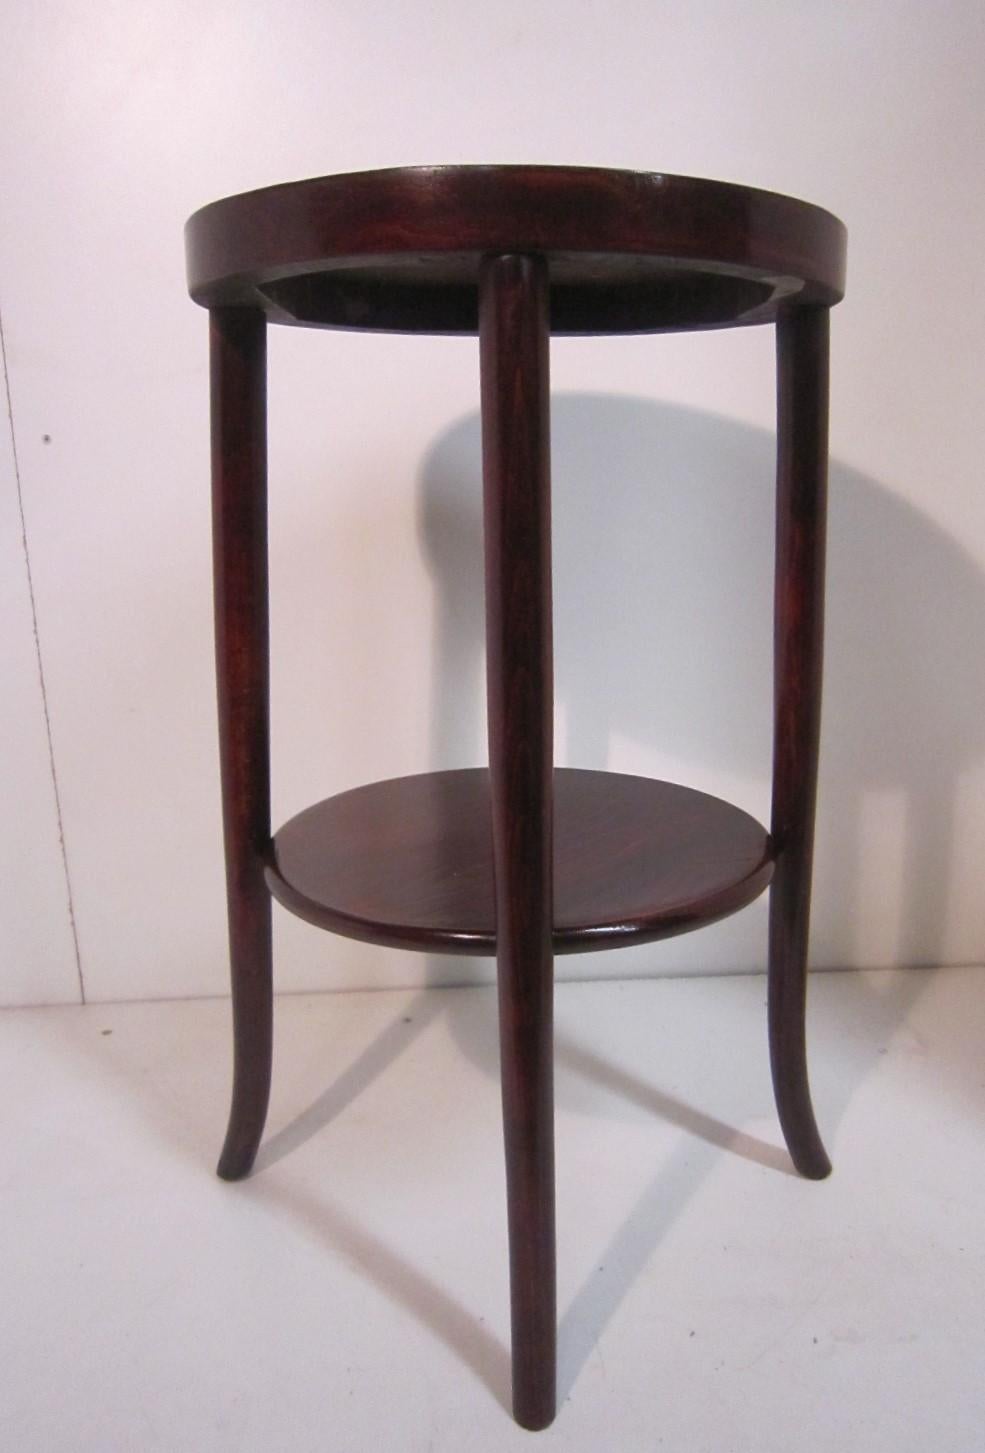 Original Austrian Small Round Bentwood Jungenstil Side Table with Oxblood Finish 1